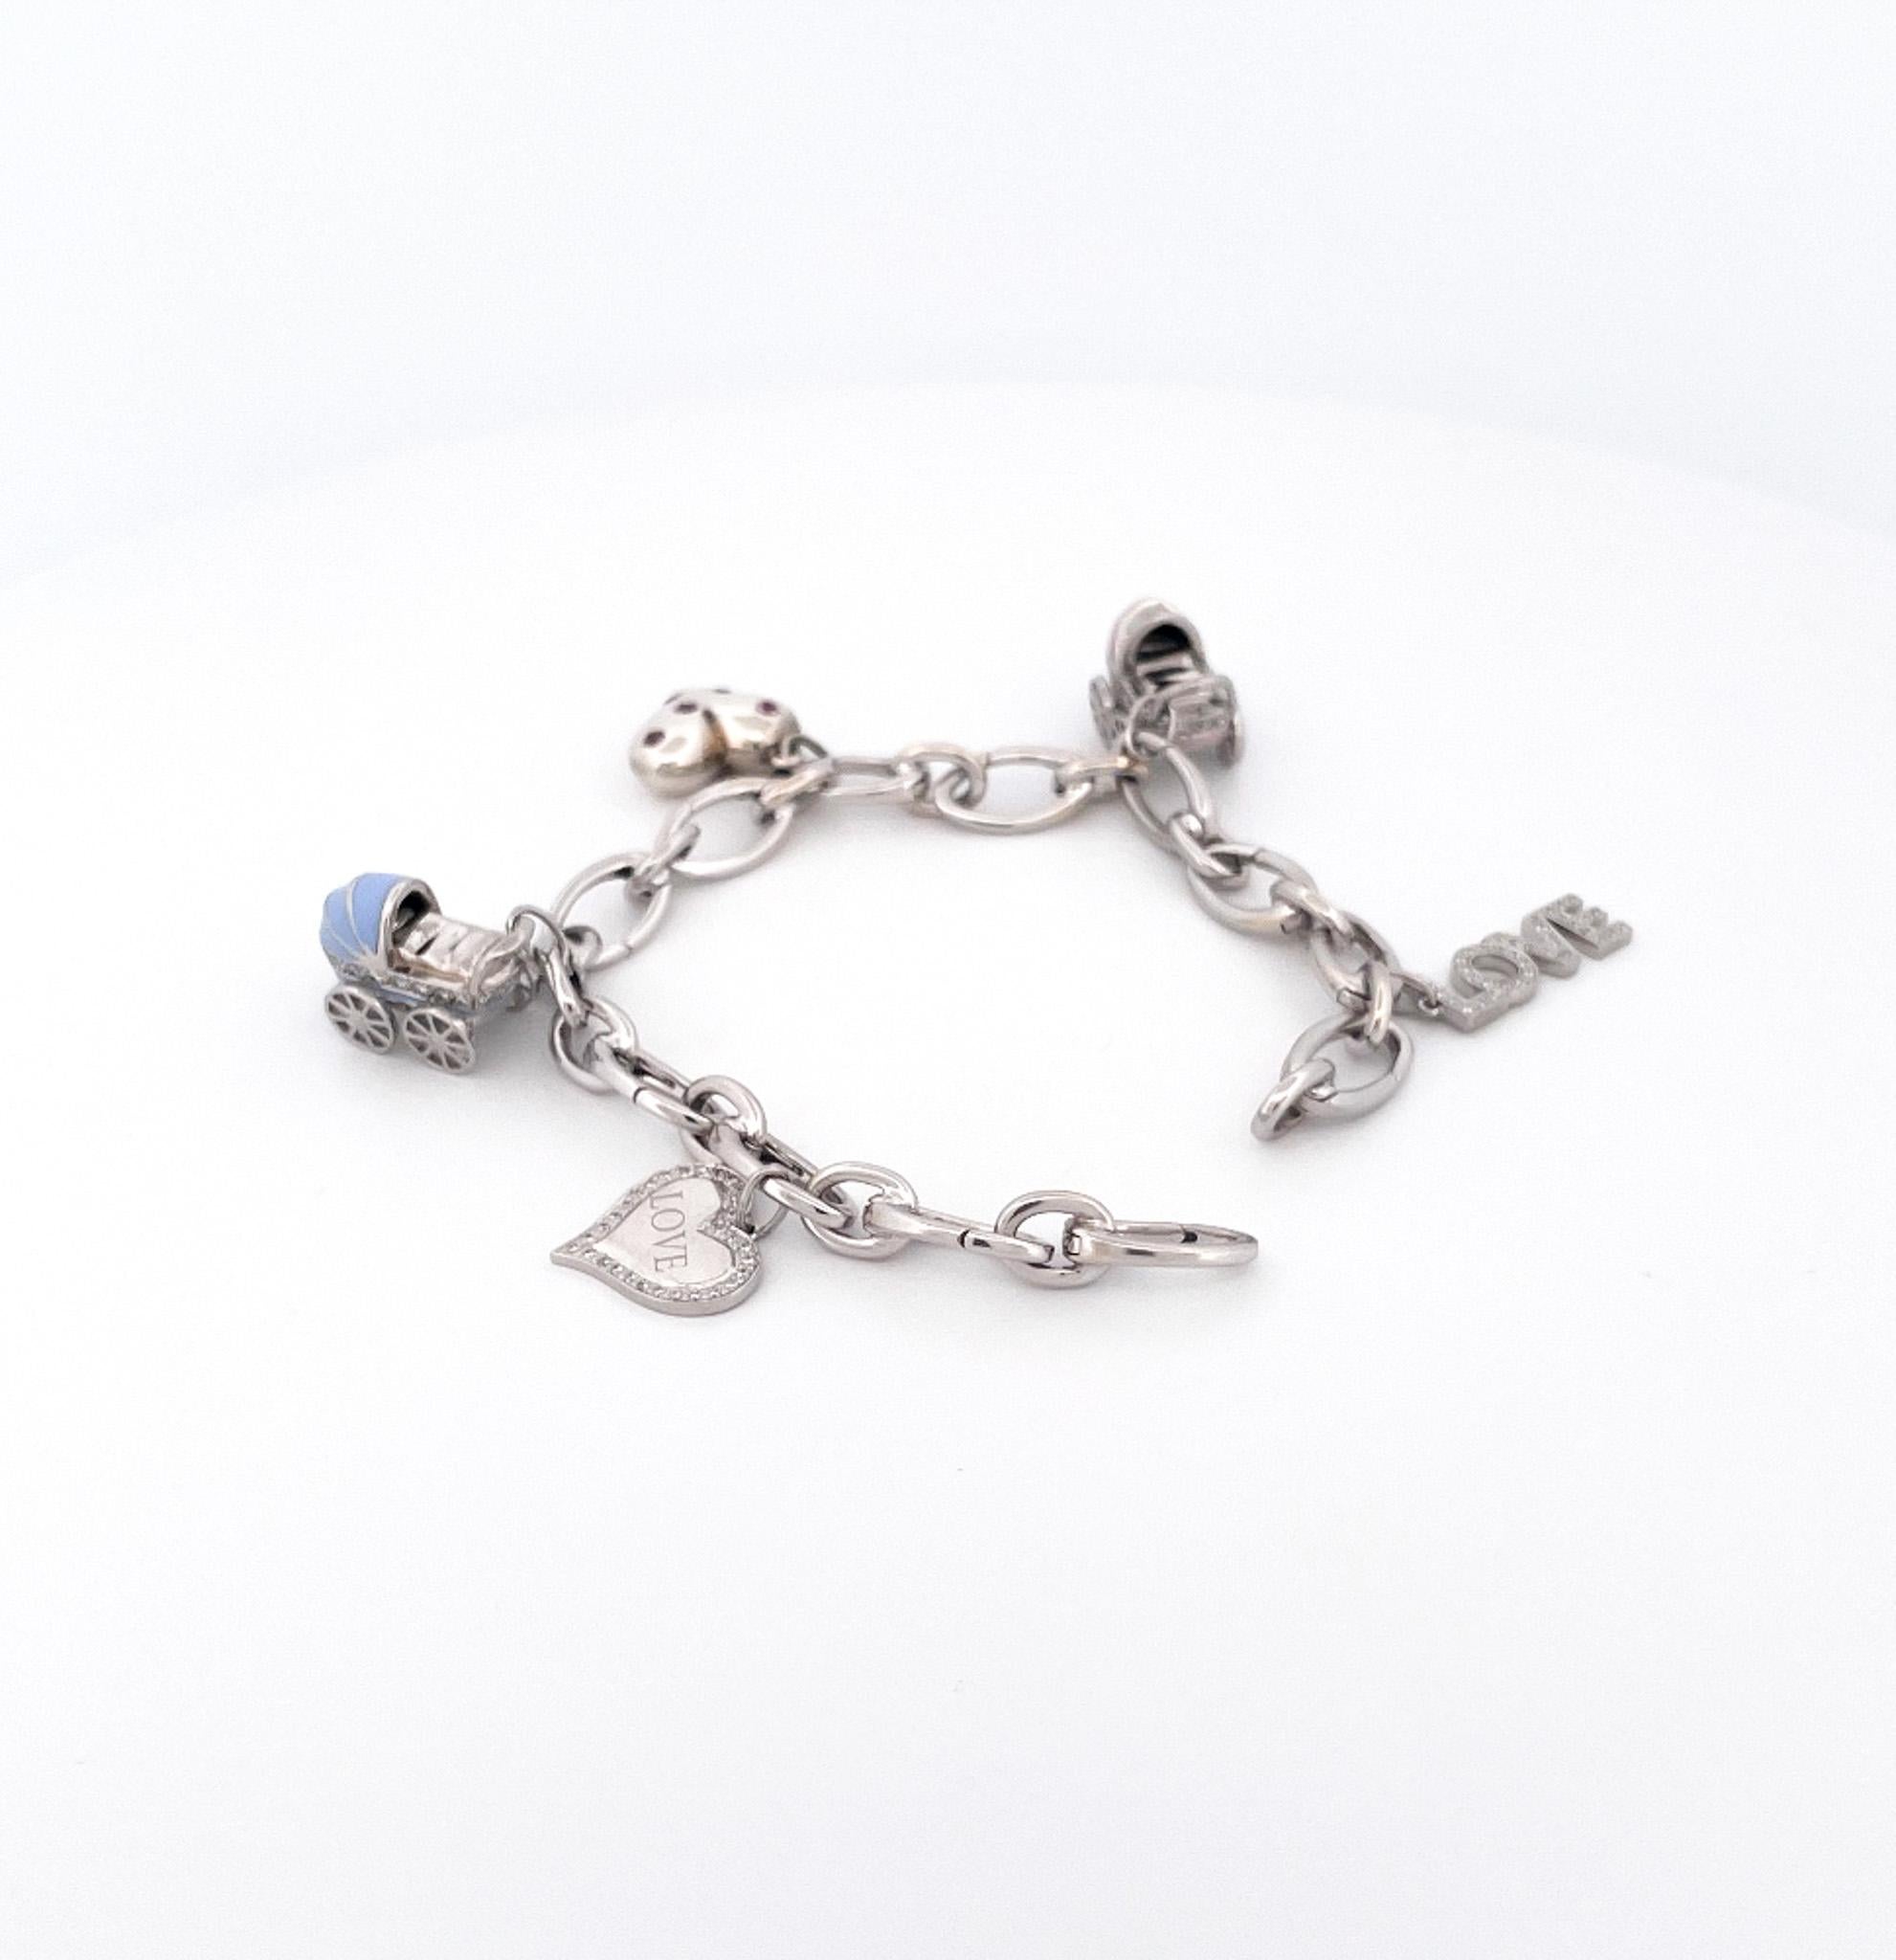 Tiffany & Co. 18k White Gold Oval Link Charm Bracelet In Excellent Condition For Sale In Dallas, TX